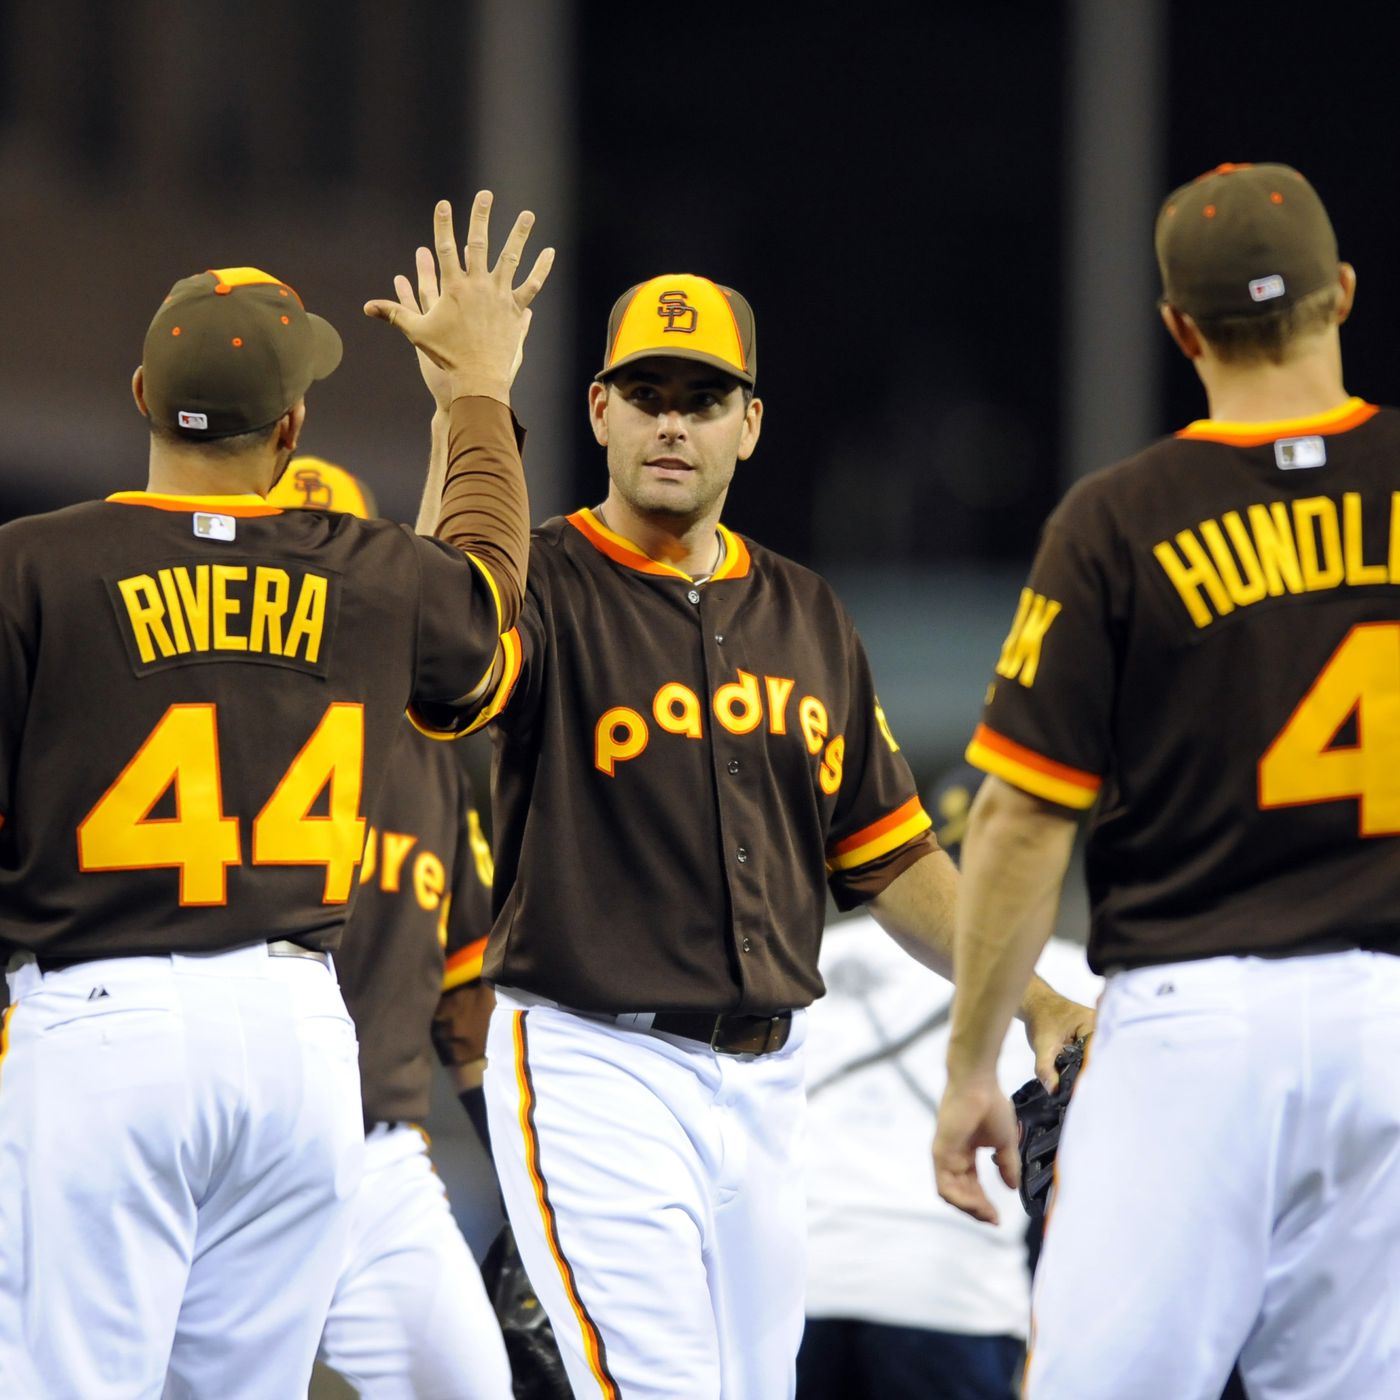 Padres Chairman says a change to Brown and Gold is not likely - Gaslamp  Ball